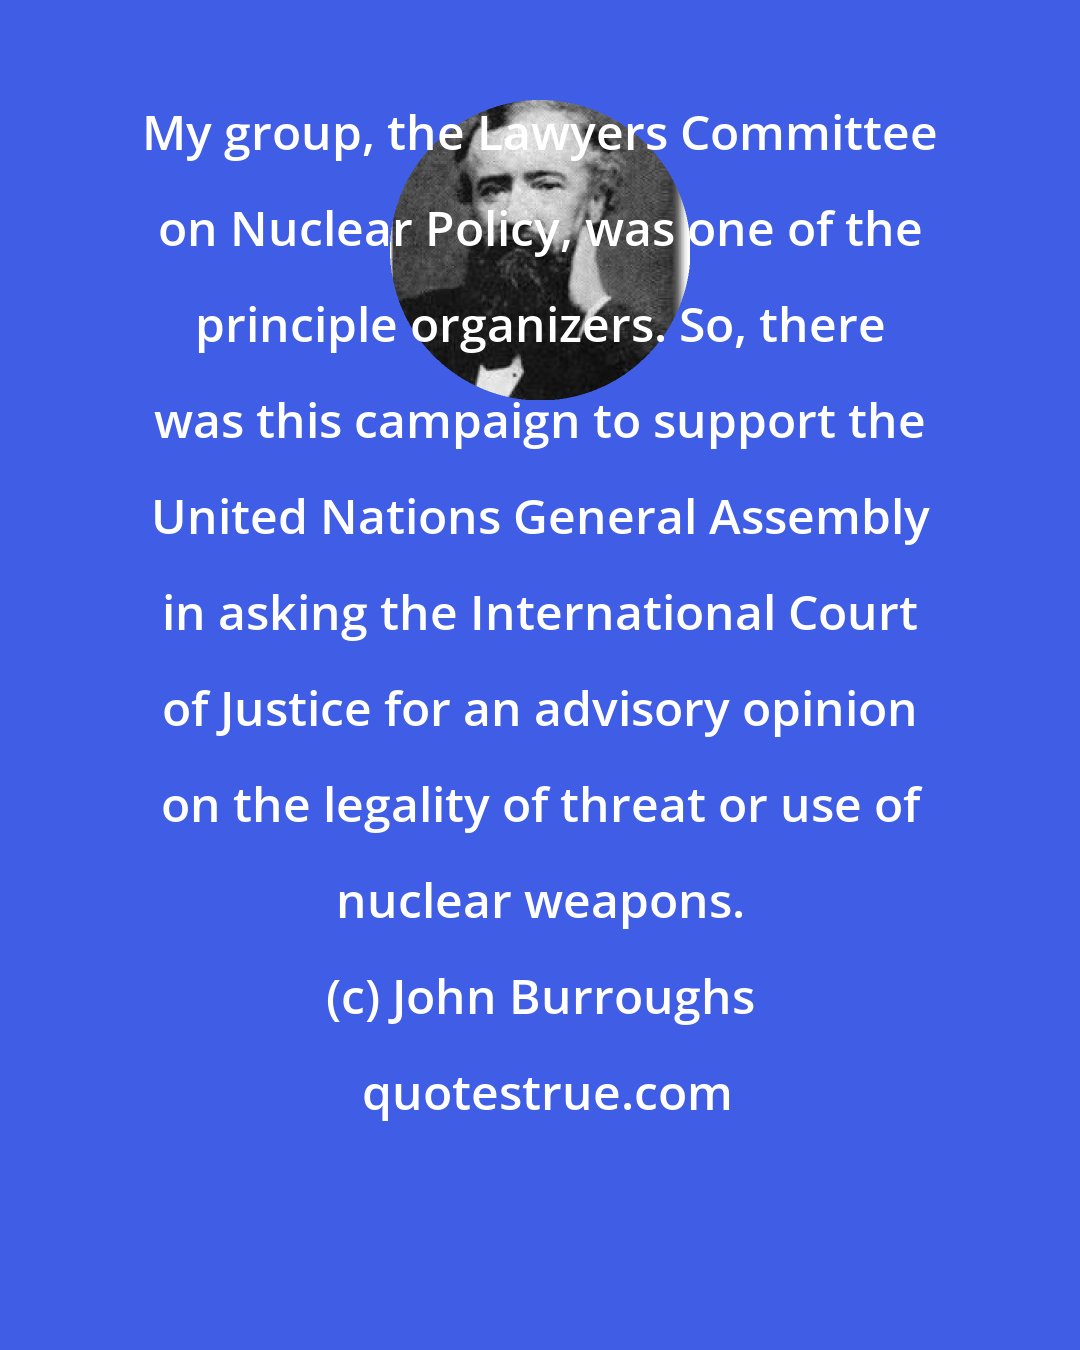 John Burroughs: My group, the Lawyers Committee on Nuclear Policy, was one of the principle organizers. So, there was this campaign to support the United Nations General Assembly in asking the International Court of Justice for an advisory opinion on the legality of threat or use of nuclear weapons.